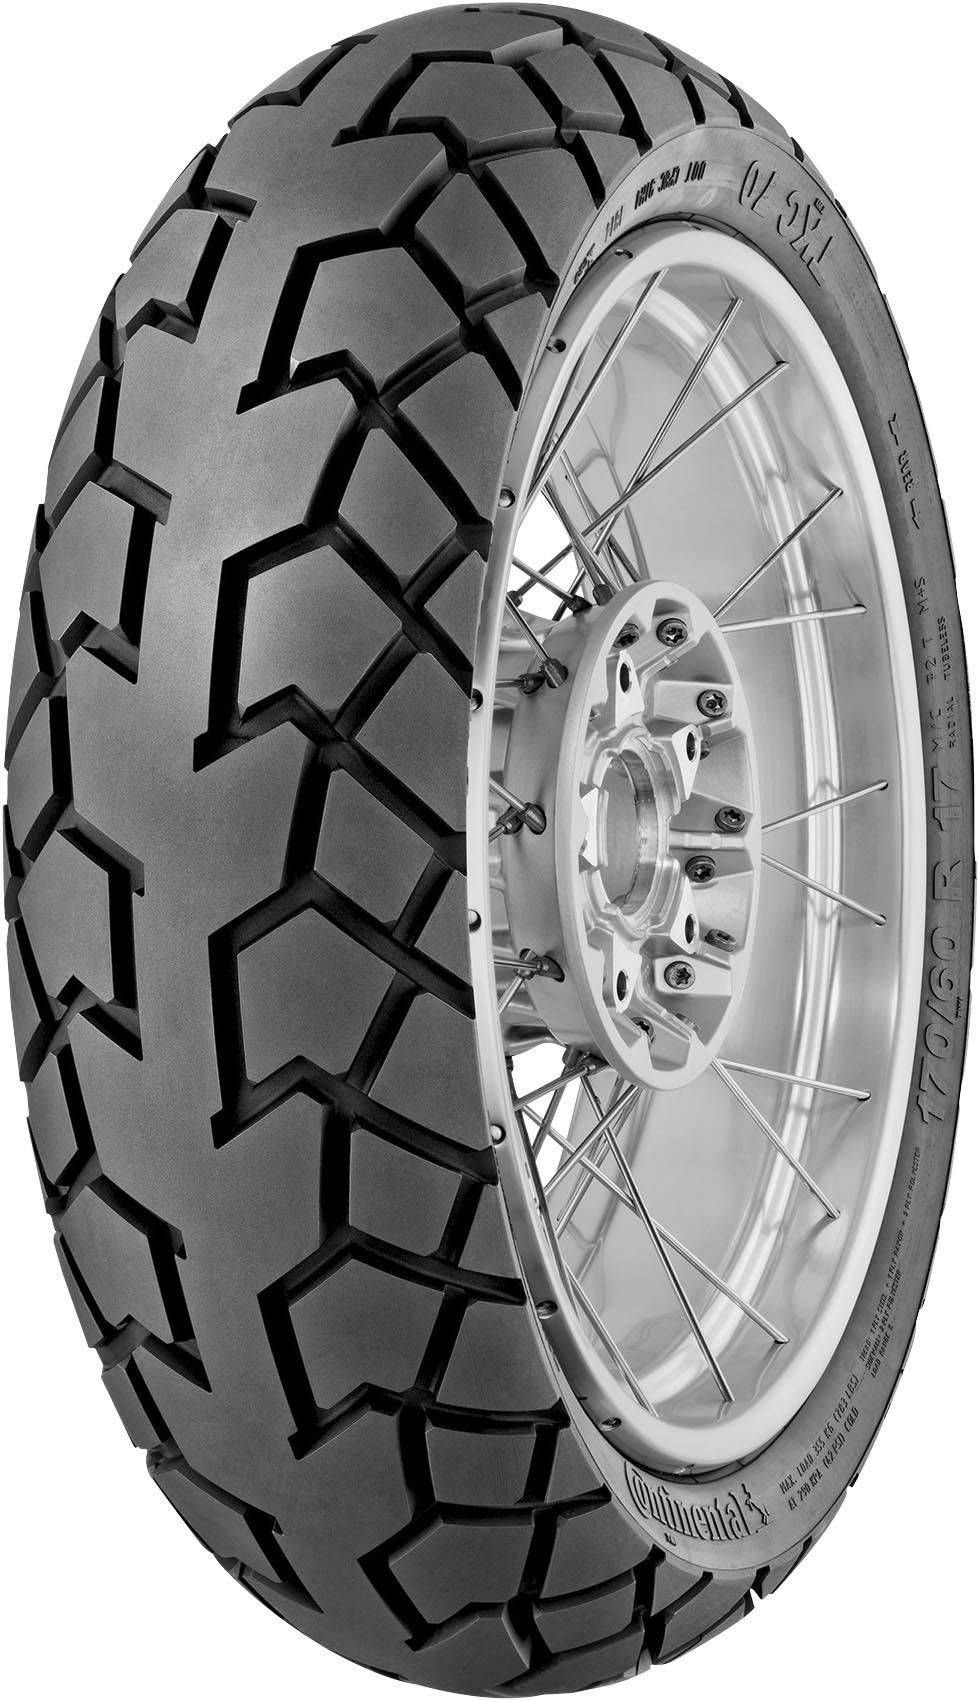 product_type-moto_tires CONTINENTAL TKC70R 140/80 R17 69S